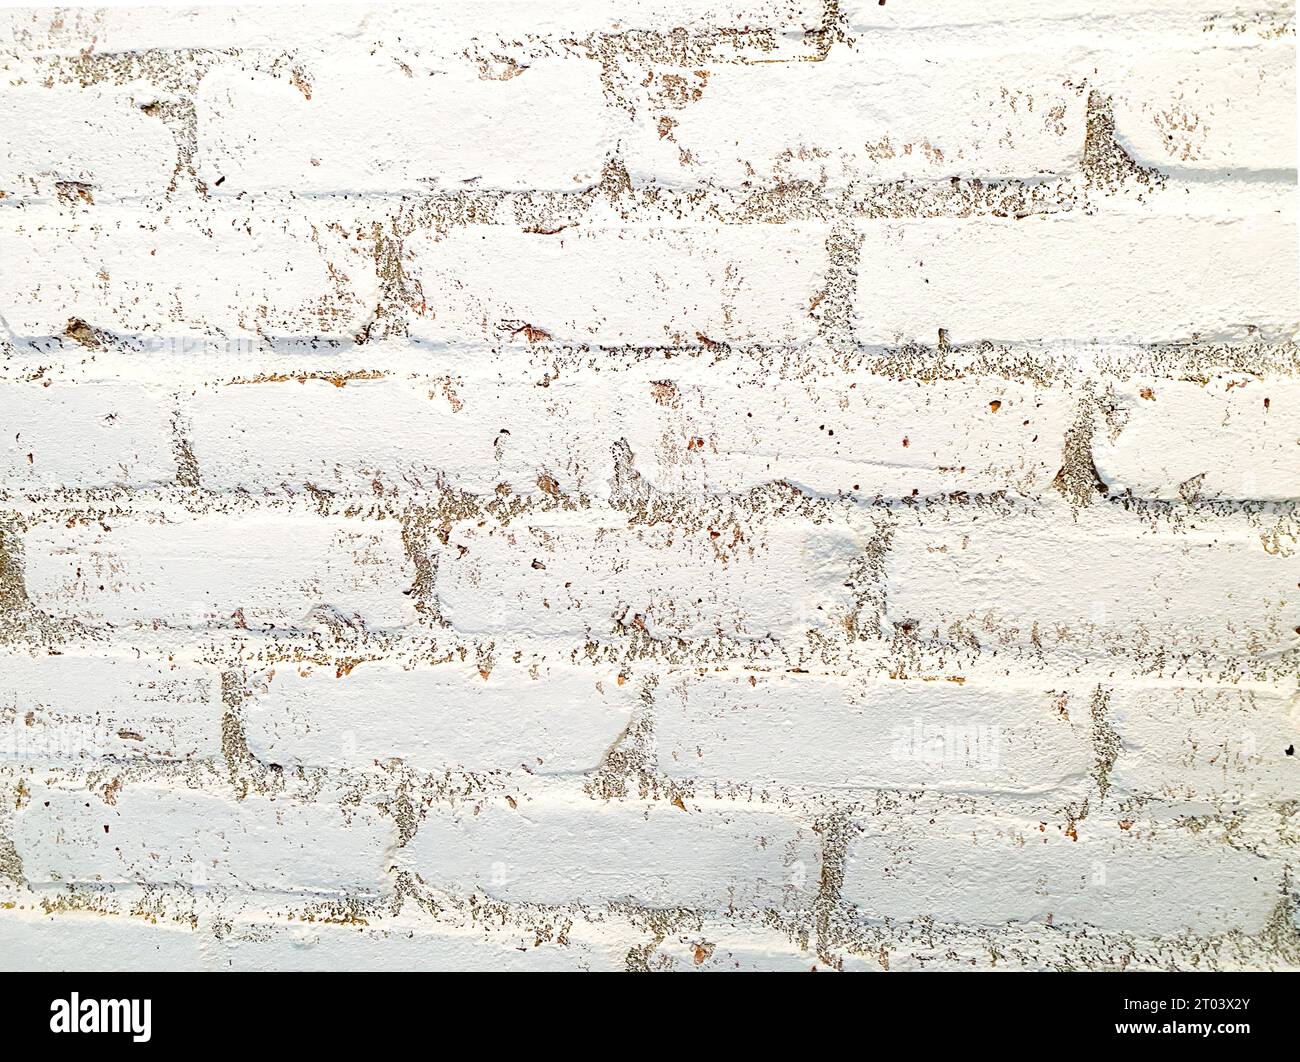 White brick wall in close up. Interior brick wall, painted white with a bit of dirt and imperfect, rough texture, worn by time. Suitable as background. Stock Photo